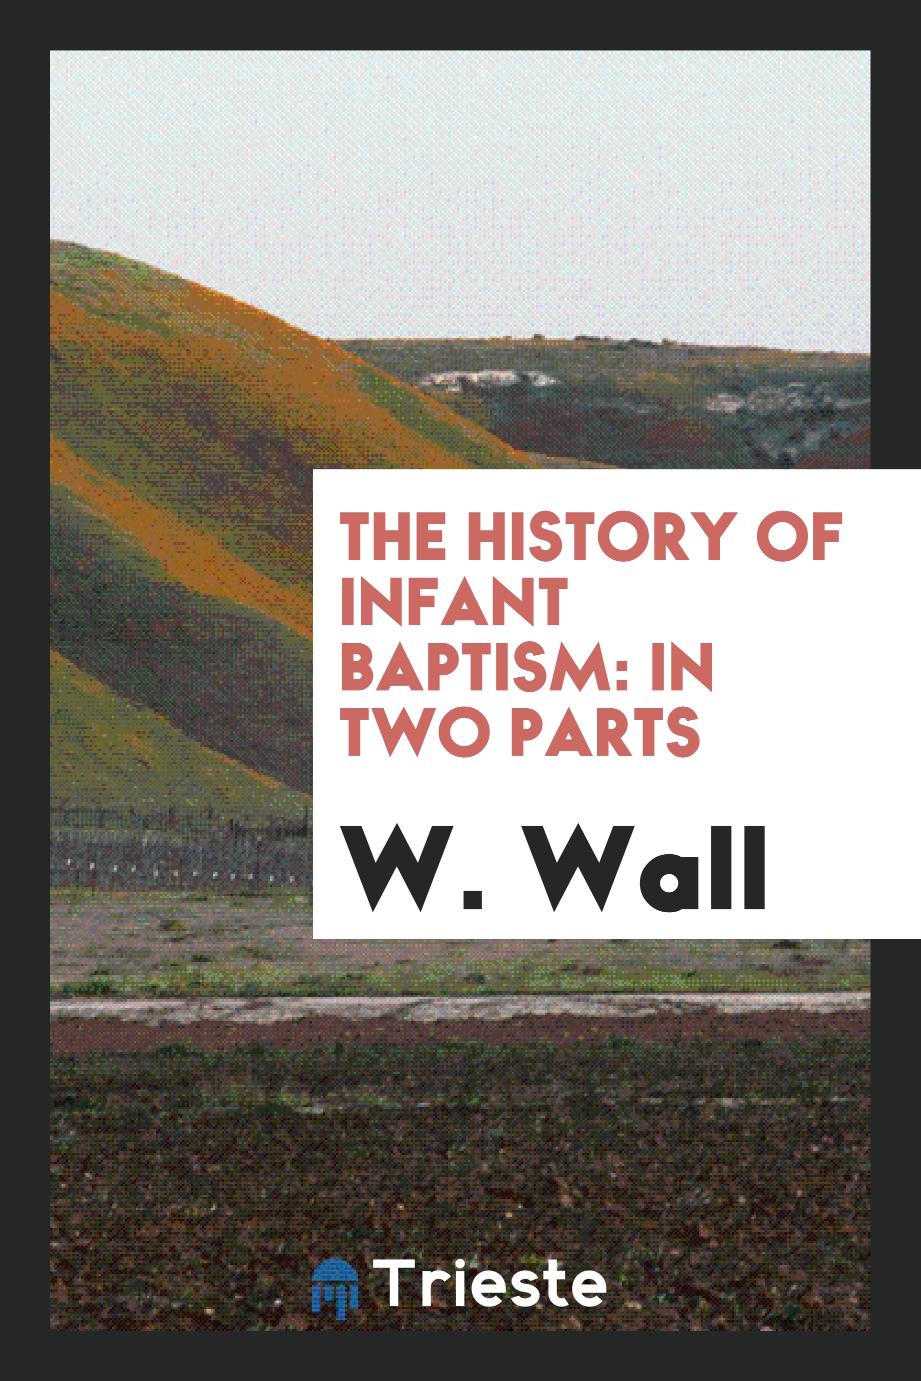 The History of Infant Baptism: In Two Parts